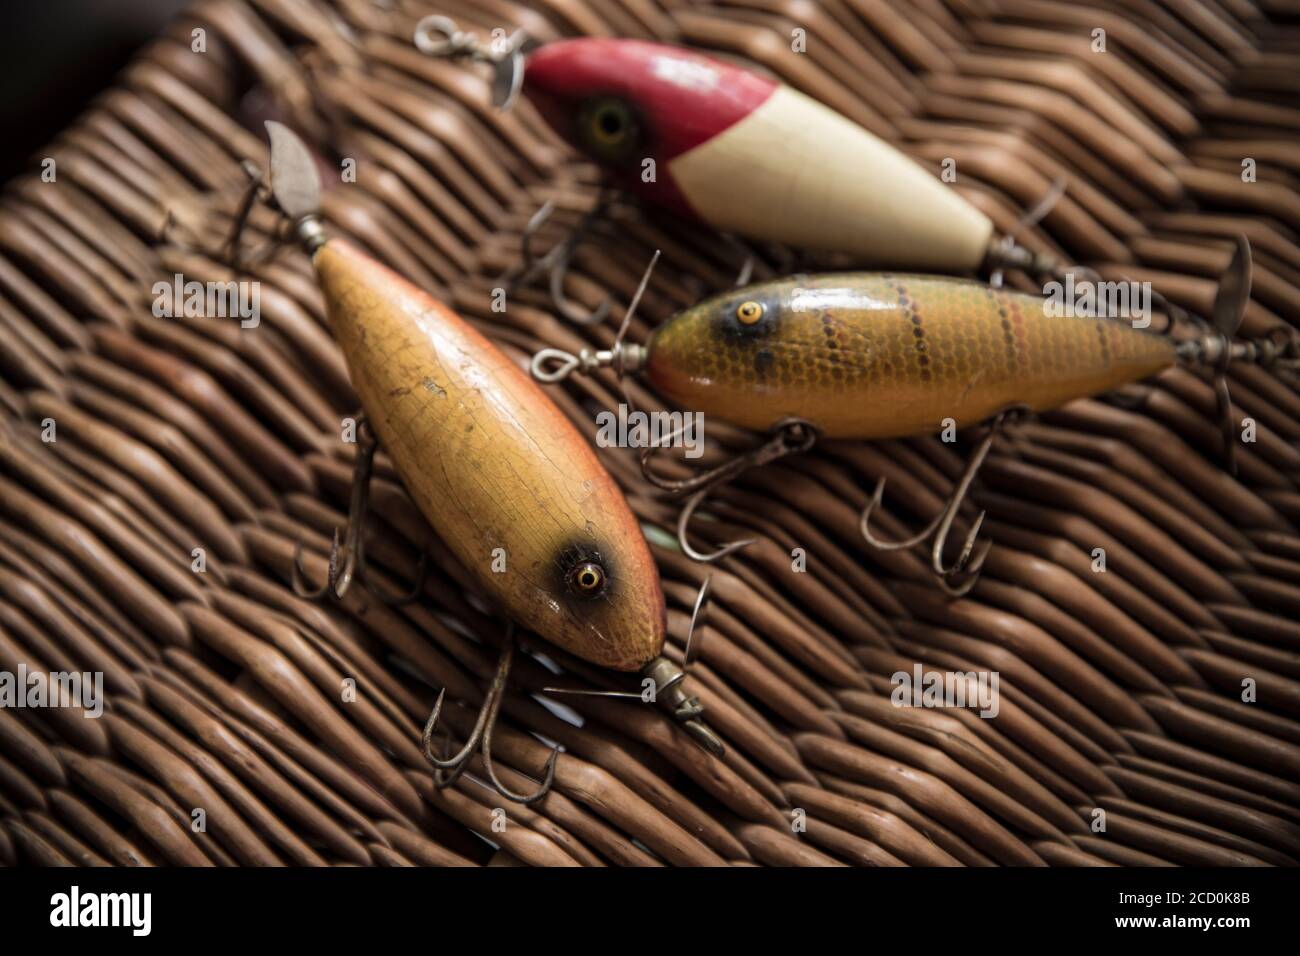 https://c8.alamy.com/comp/2CD0K8B/examples-of-old-south-bend-fishing-lures-or-plugs-designed-to-catch-predatory-fish-displayed-on-an-old-whicker-tackle-box-from-a-collection-of-vint-2CD0K8B.jpg